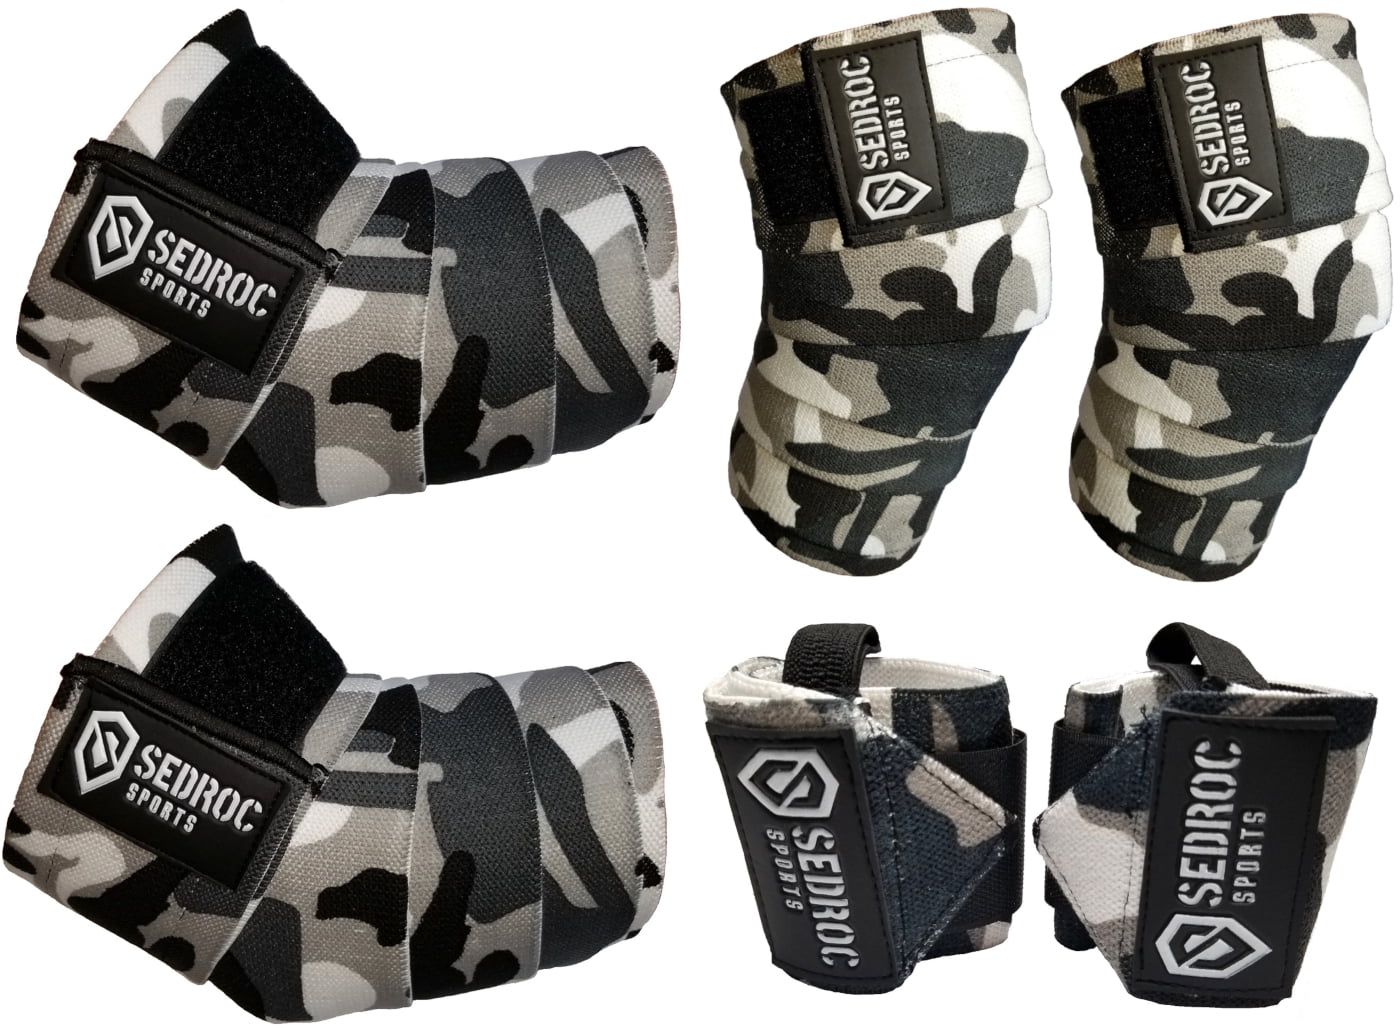 ELBOW Wraps Weight Lifting Bandage Strap Guard Powerlifting Pad Sleeves Gym Camo 